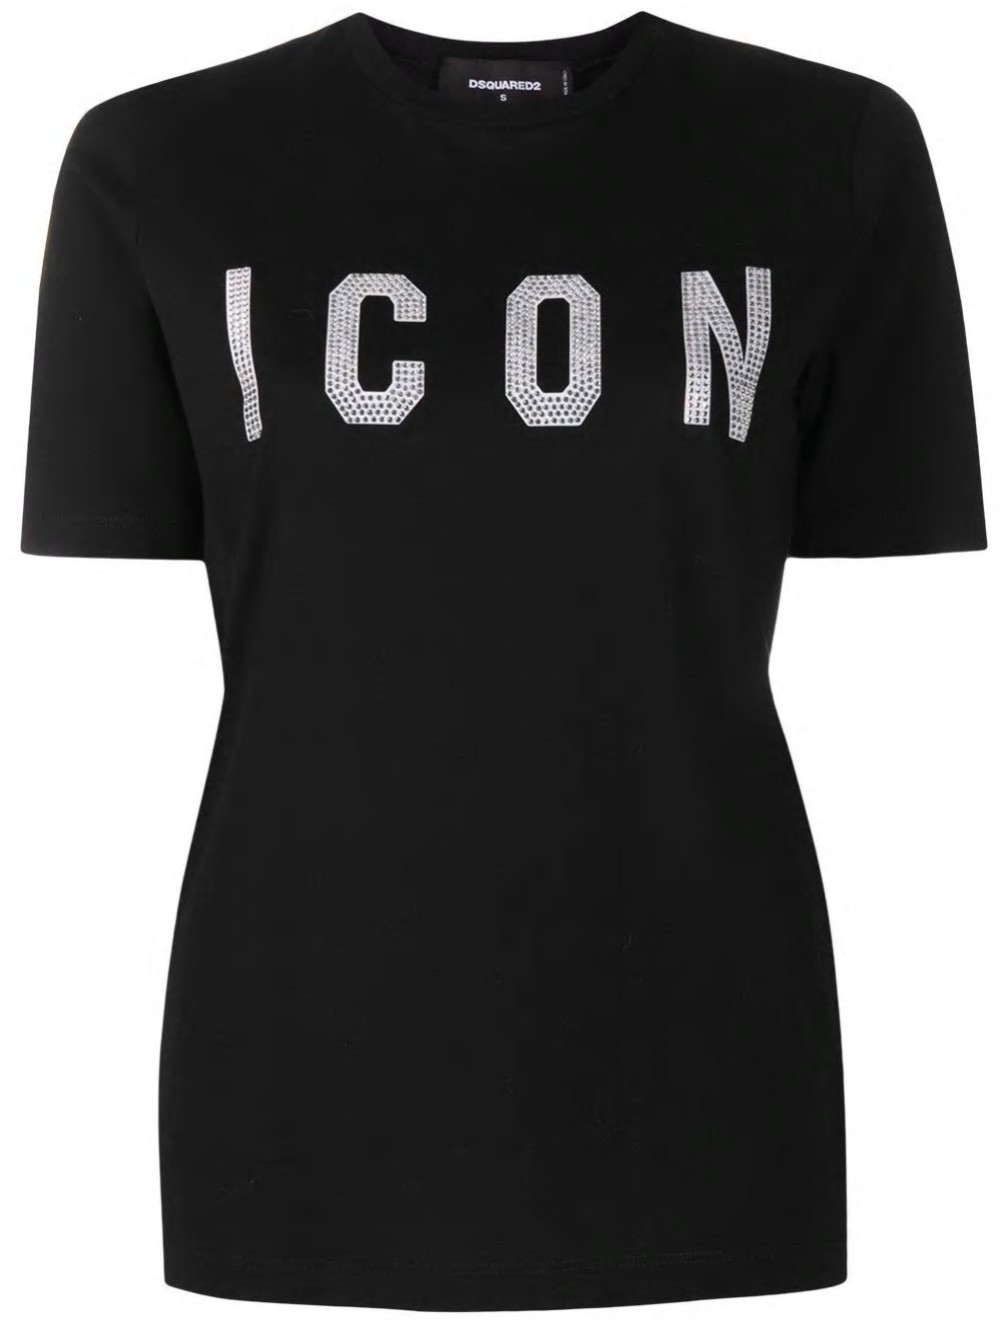 Dsquared2 T-shirt Icon